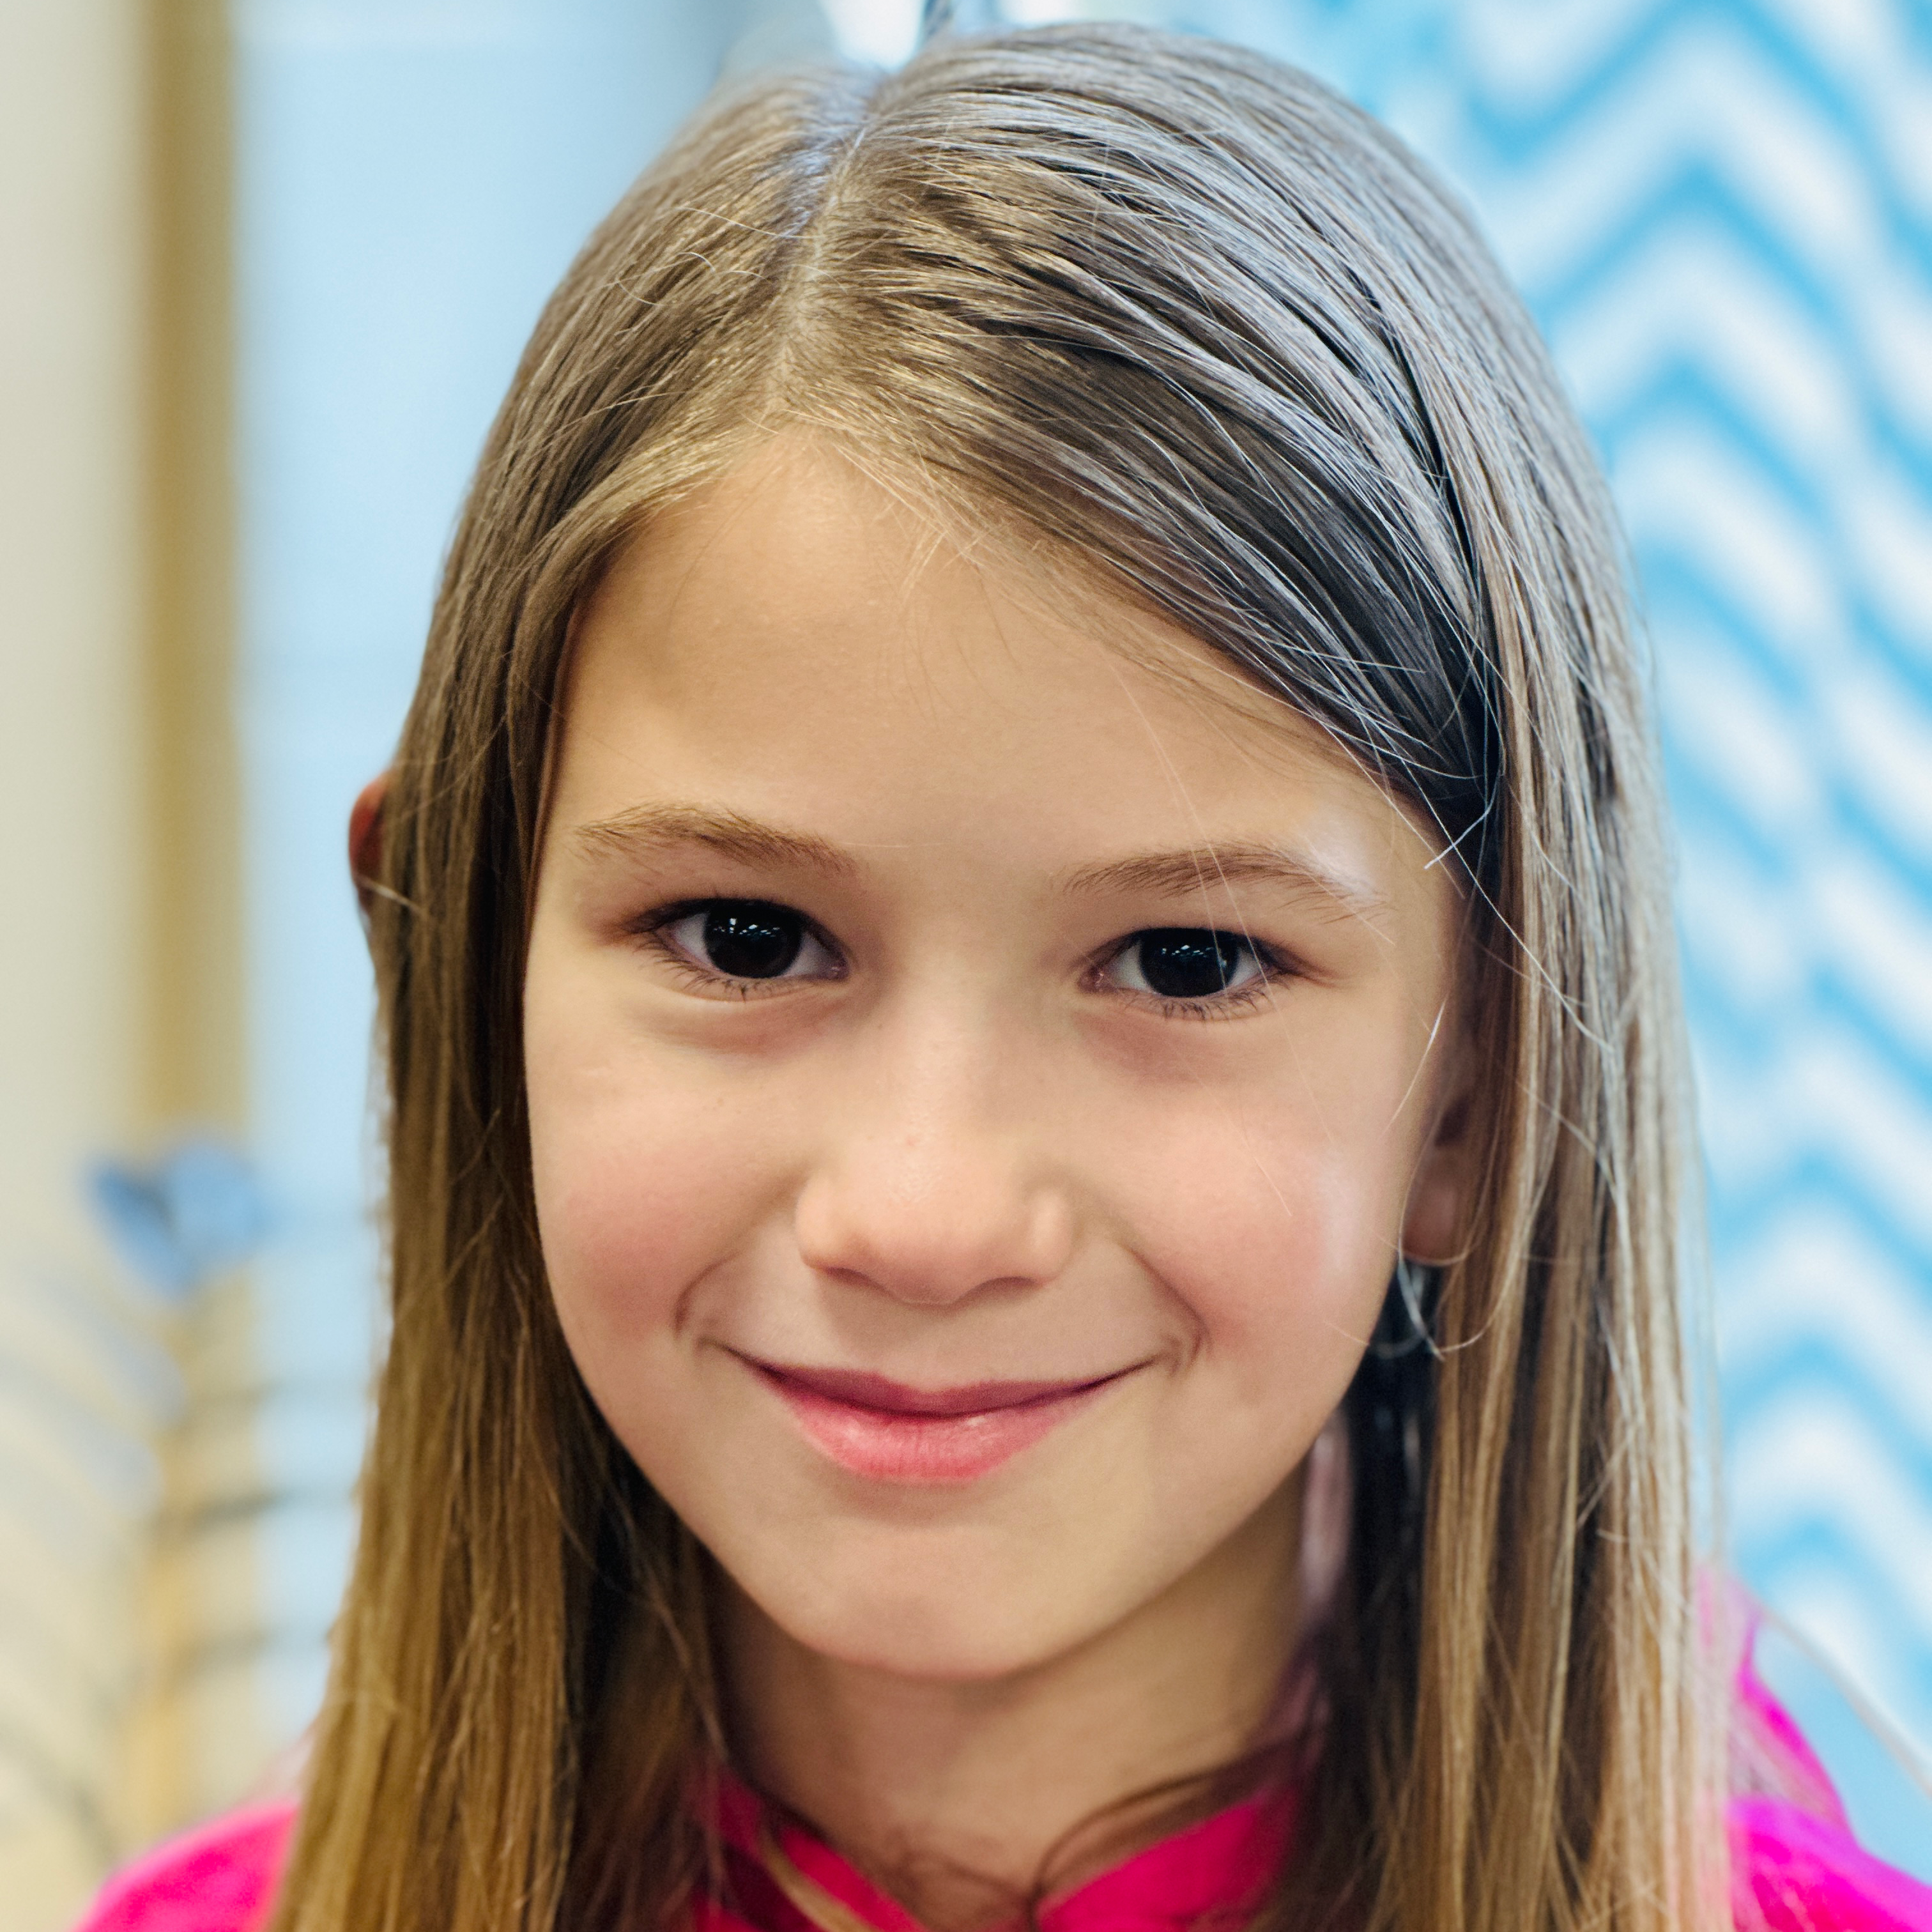 Sequoyah Elementary Student of the Month 